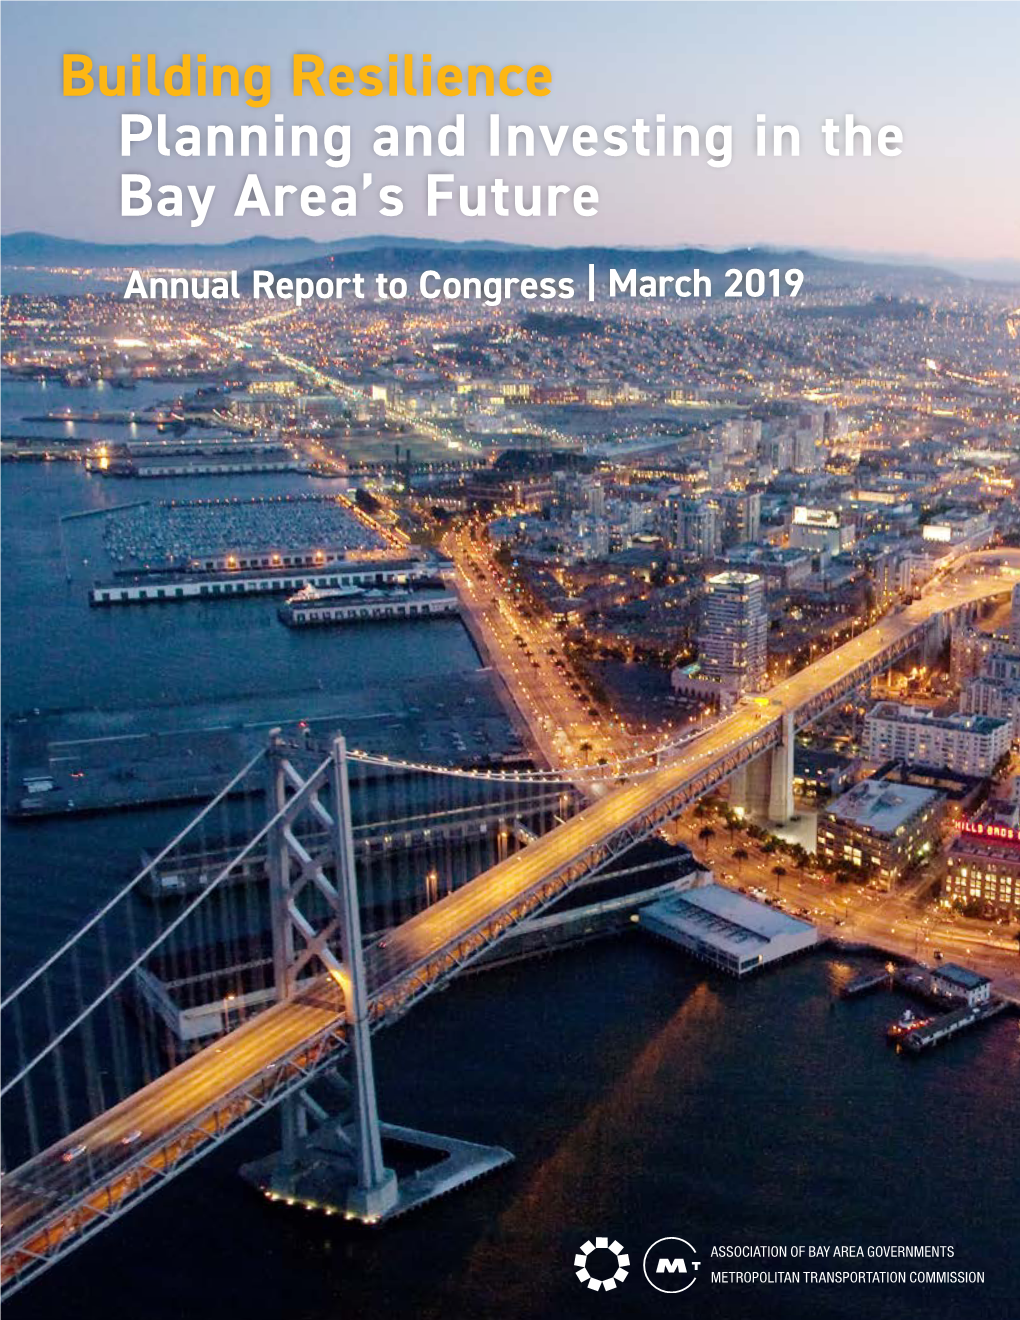 Building Resilience Planning and Investing in the Bay Area's Future